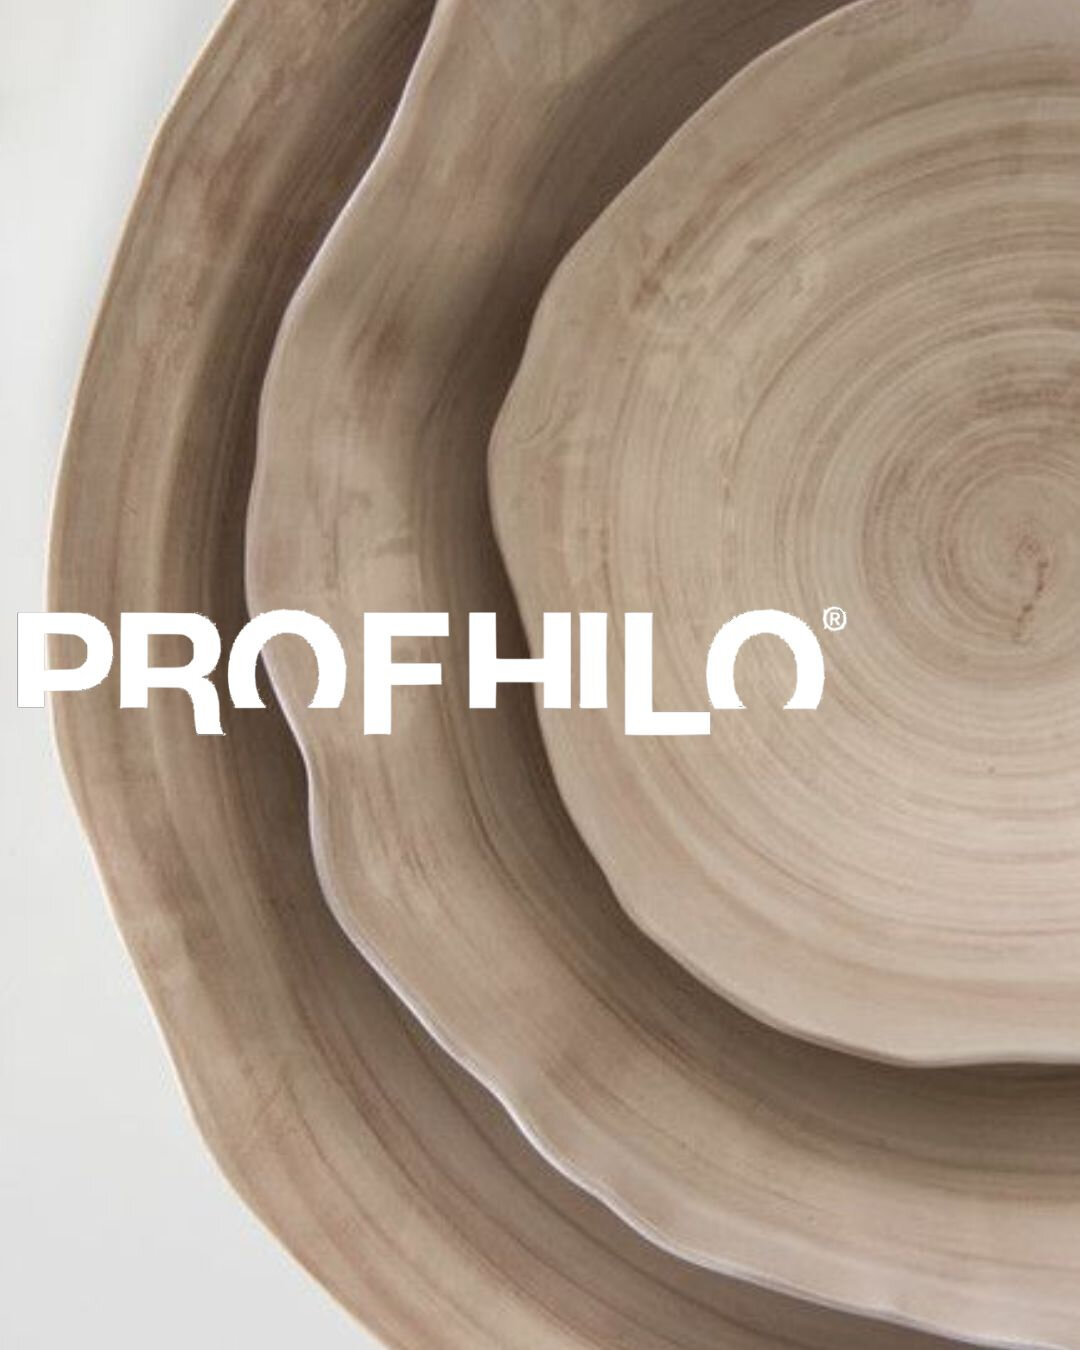 P R O F H I L O ​​​​​​​​​
PROFHILO - 1 Treatment
45 minutes &pound;250.00

PROFHILO - 2 Treatments
45 minutes &pound;450.00

PROFHILO&reg; is not a filler, but a HA (Hyaluronic Acid) gel, which bio-remodels your skin to treat its laxity. This innovat